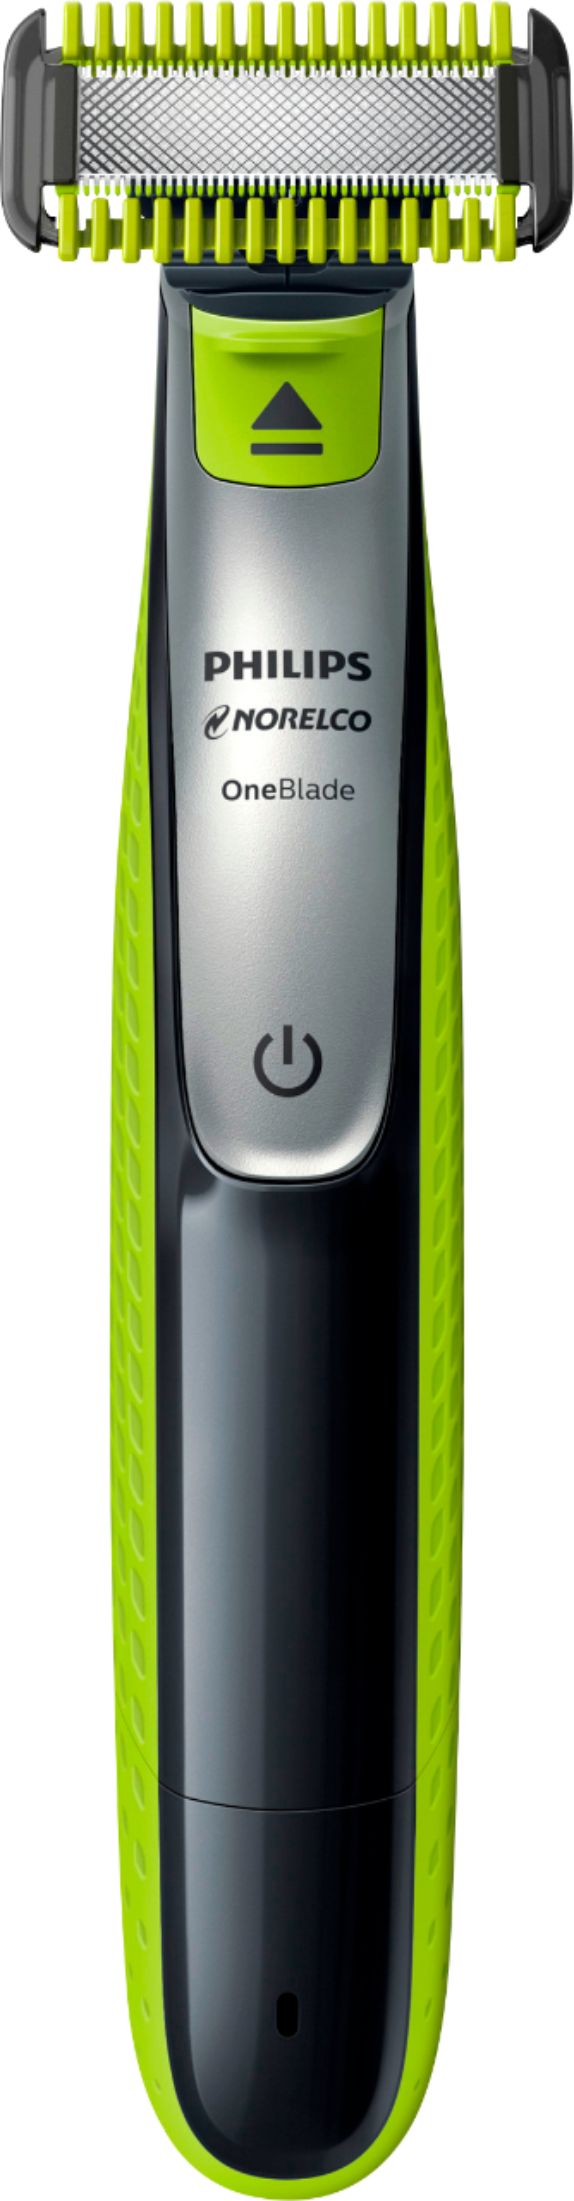 obligat Array Sydamerika Philips Norelco OneBlade Face + Body hybrid electric trimmer and shaver,  QP2630/70 Black, Green, Silver QP2630/70 - Best Buy